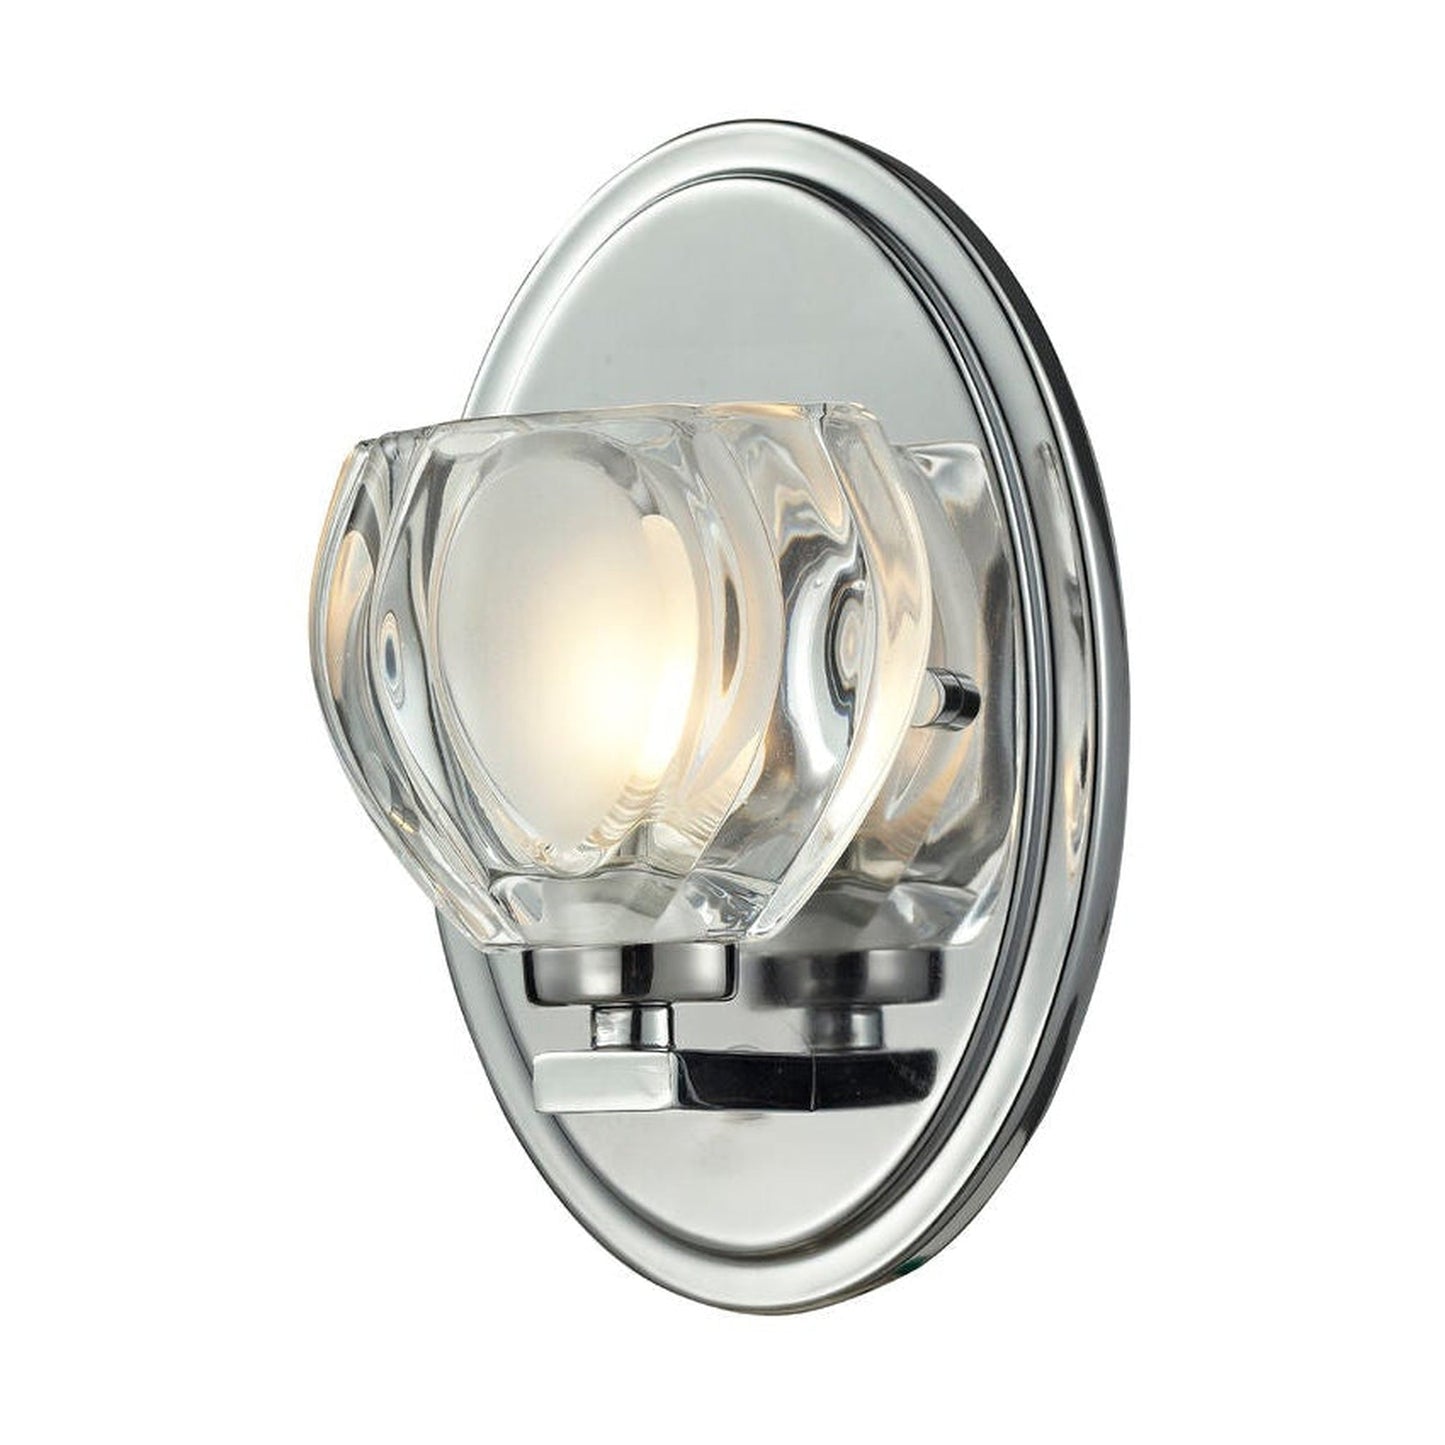 Z-Lite Hale 5" 1-Light Chrome Vanity Light With Clear Frosted Glass Shade